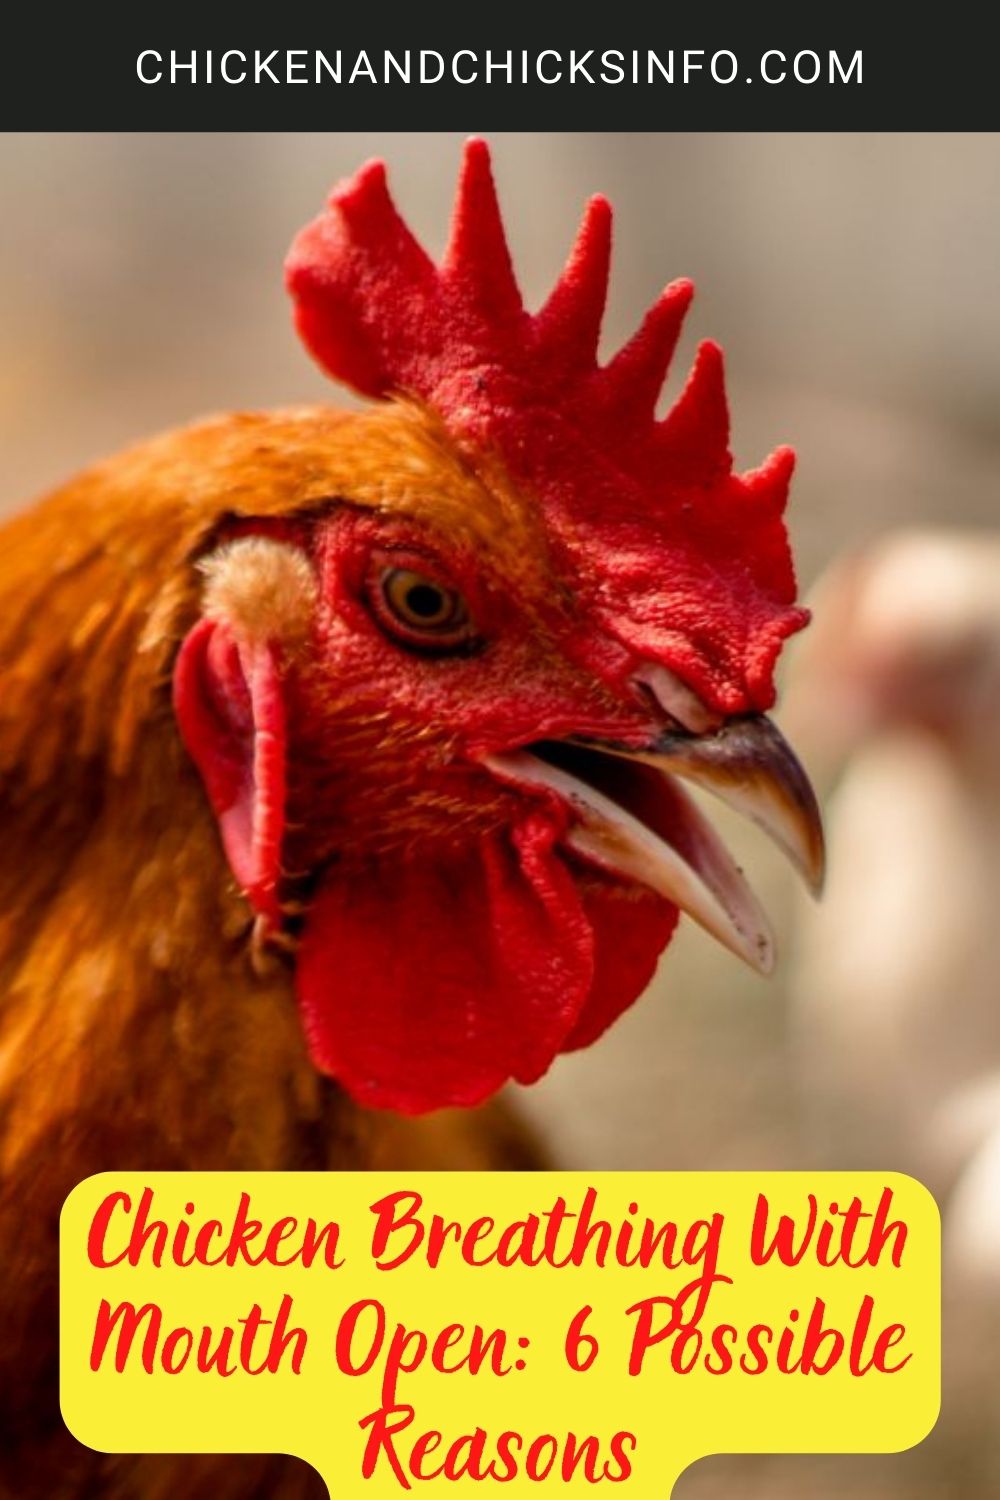 Chicken Breathing With Mouth Open: 6 Possible Reasons poster.
